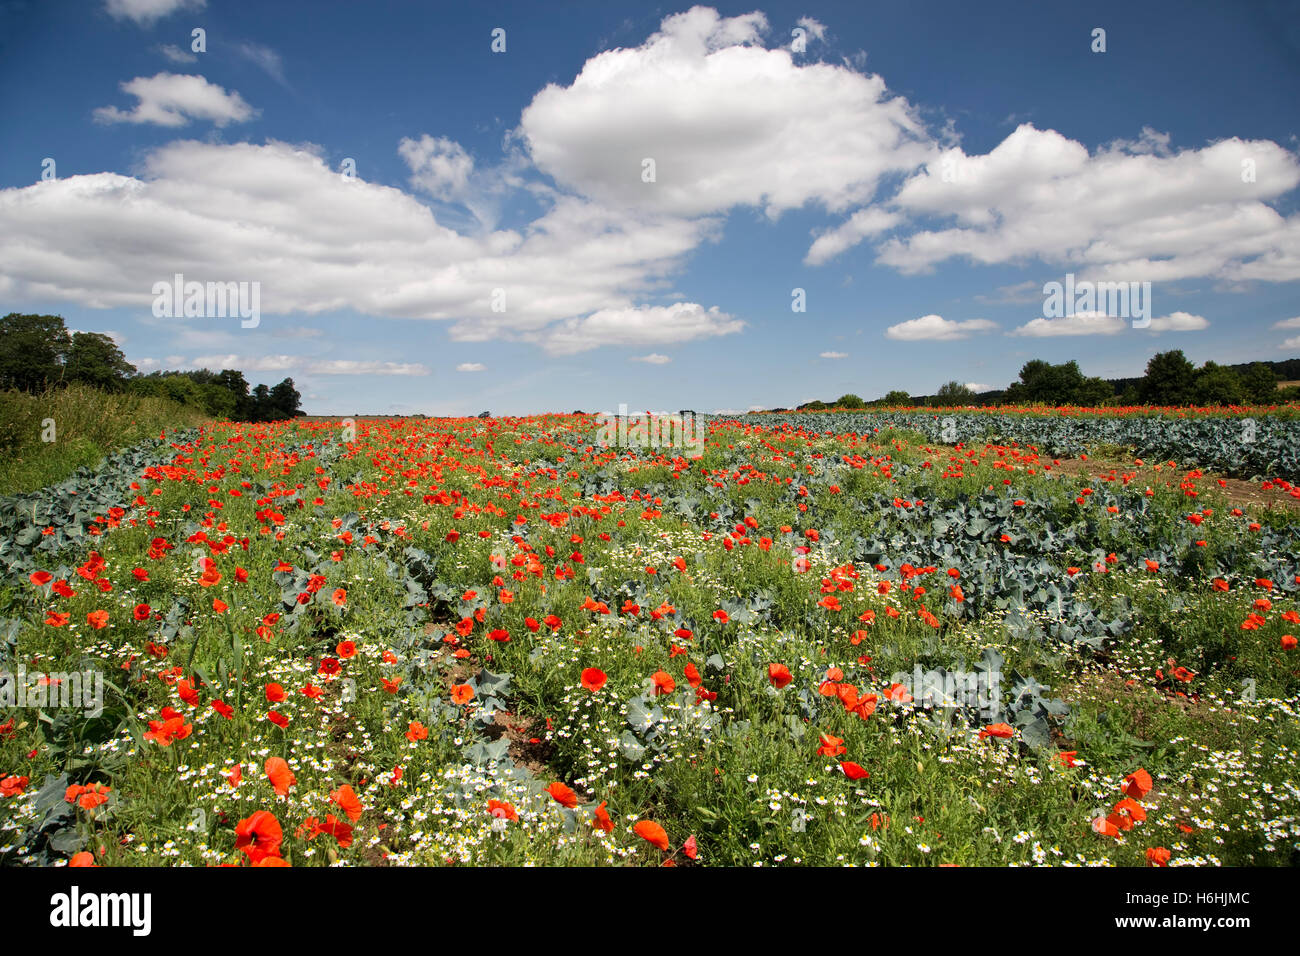 View across a poppy field in mid summer with blue skies and fluffy white clouds Stock Photo